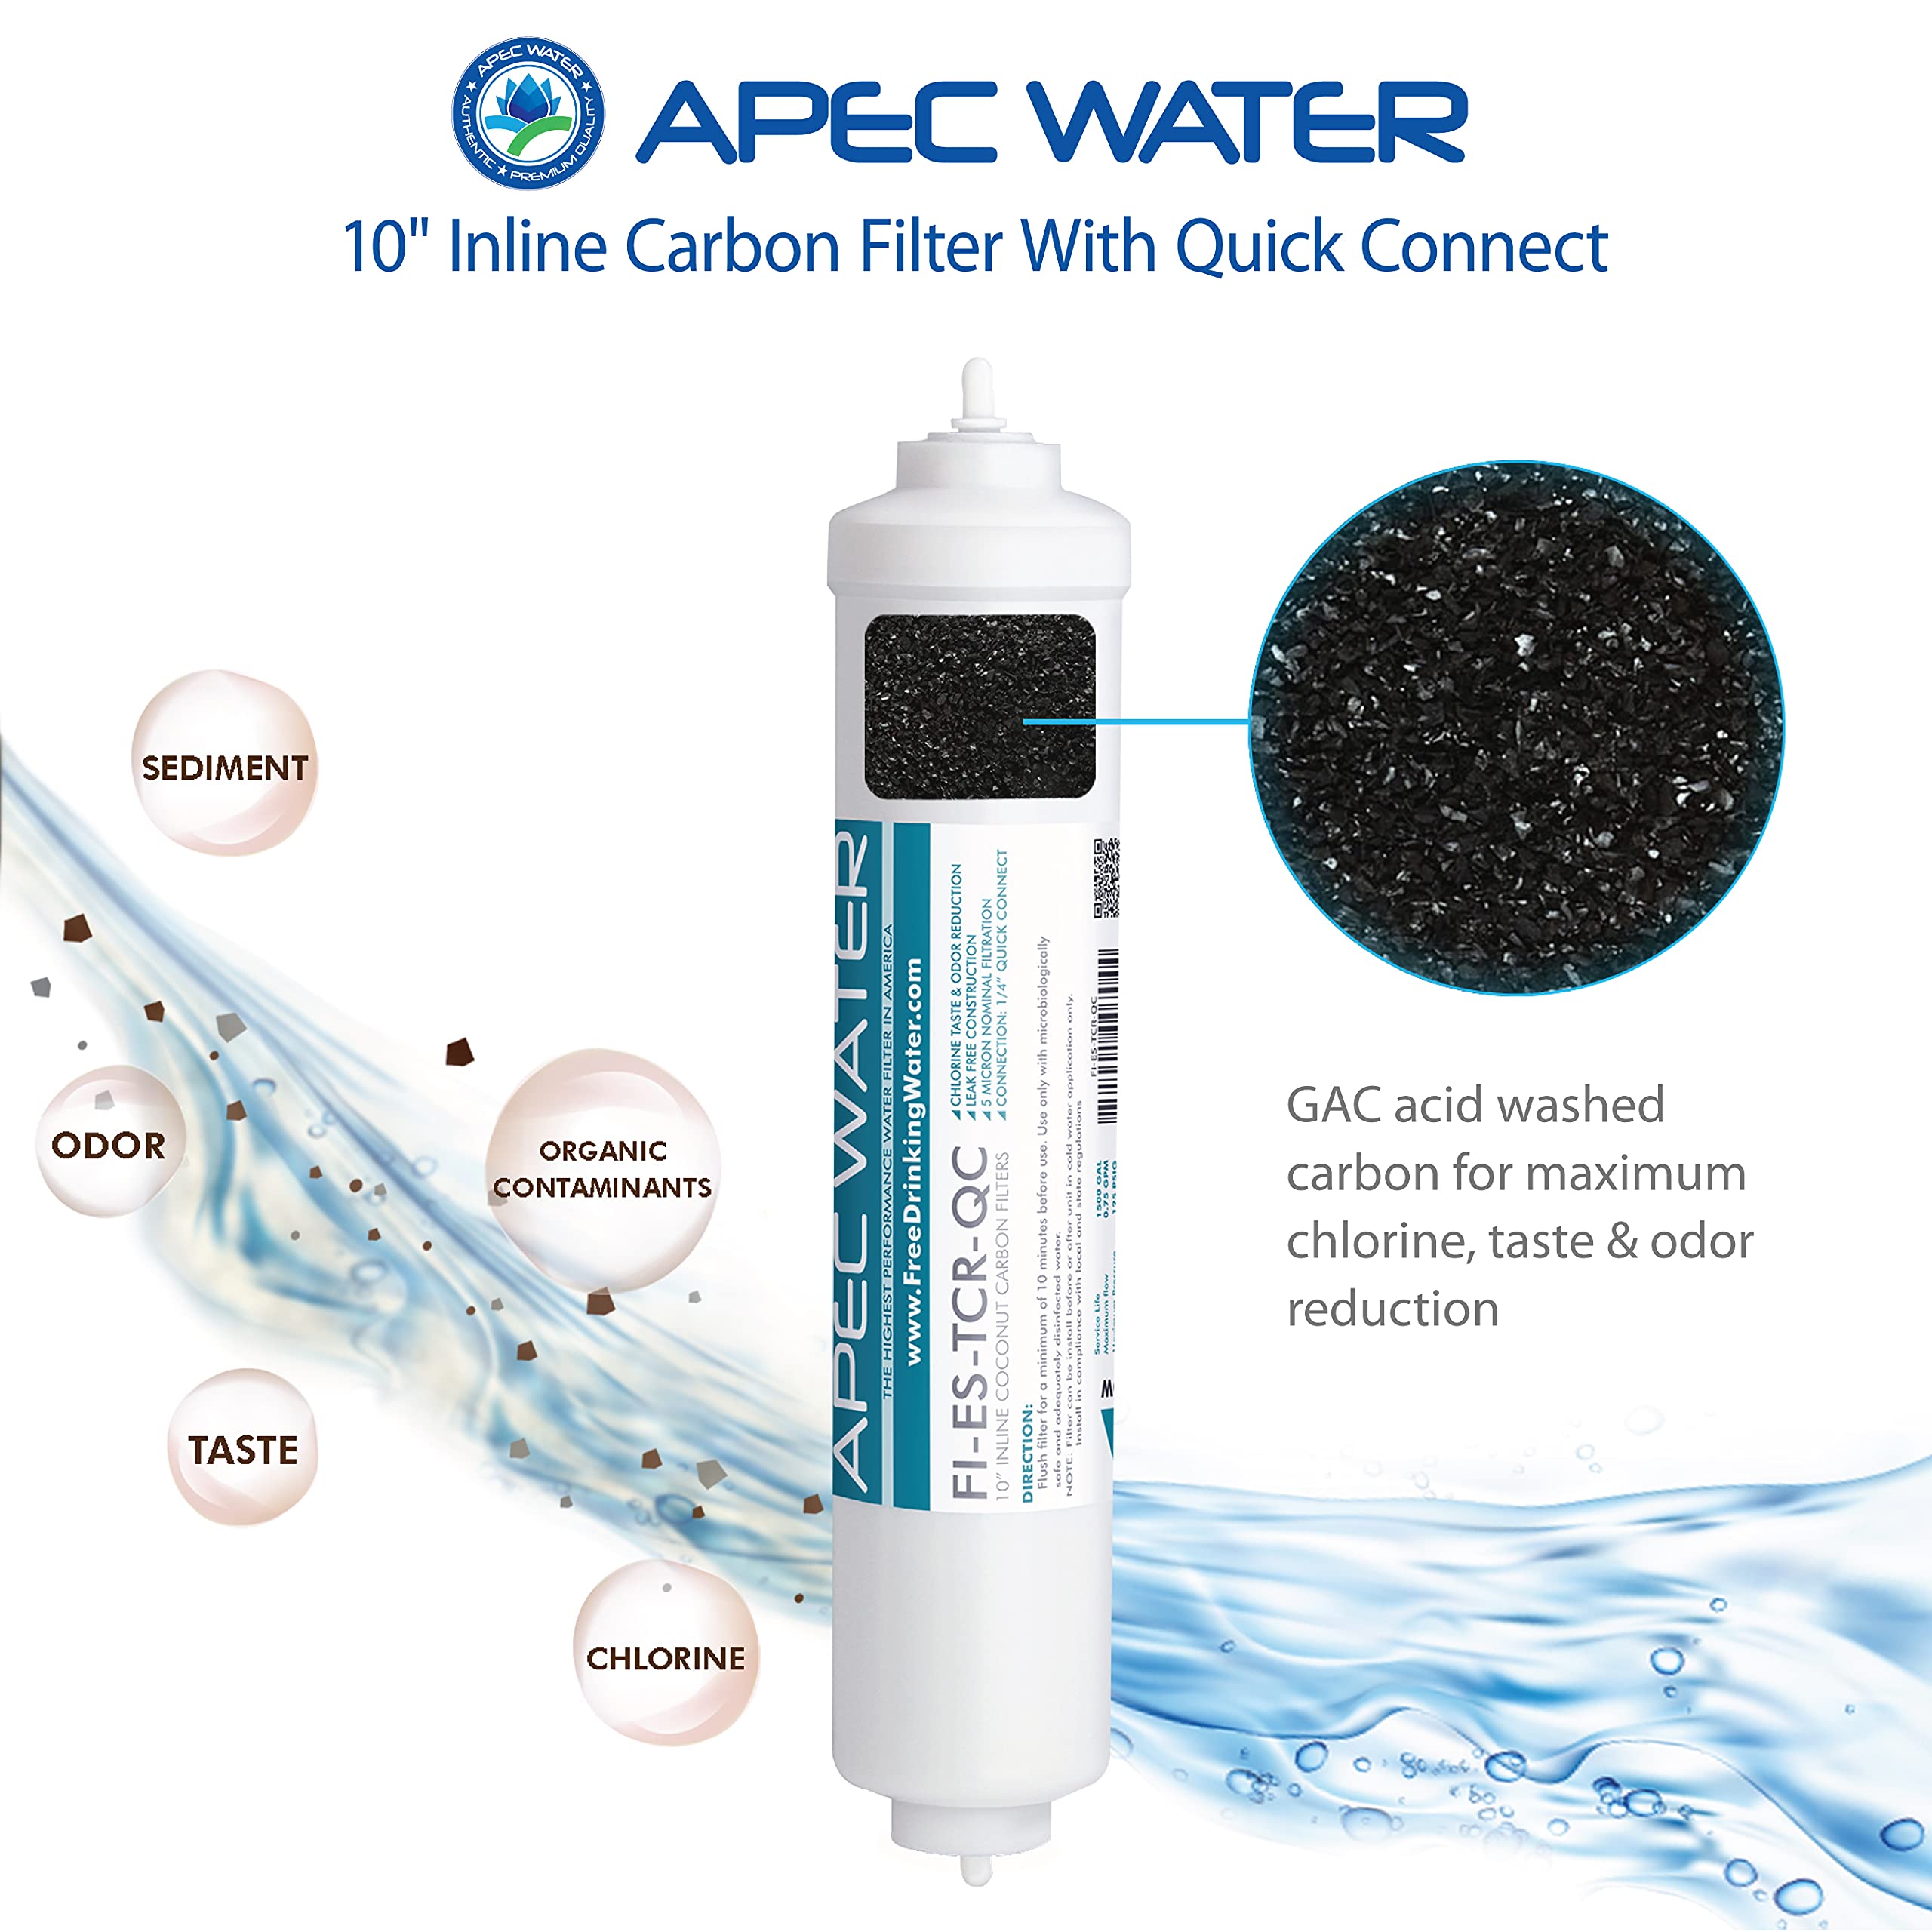 APEC Water Systems FI-ES-TCR-QC 10" High Capacity Inline Carbon Filter with 1/4" Quick Connect for Undersink Reverse Osmosis Water System Stage-5, 1 Count (Pack of 1), White